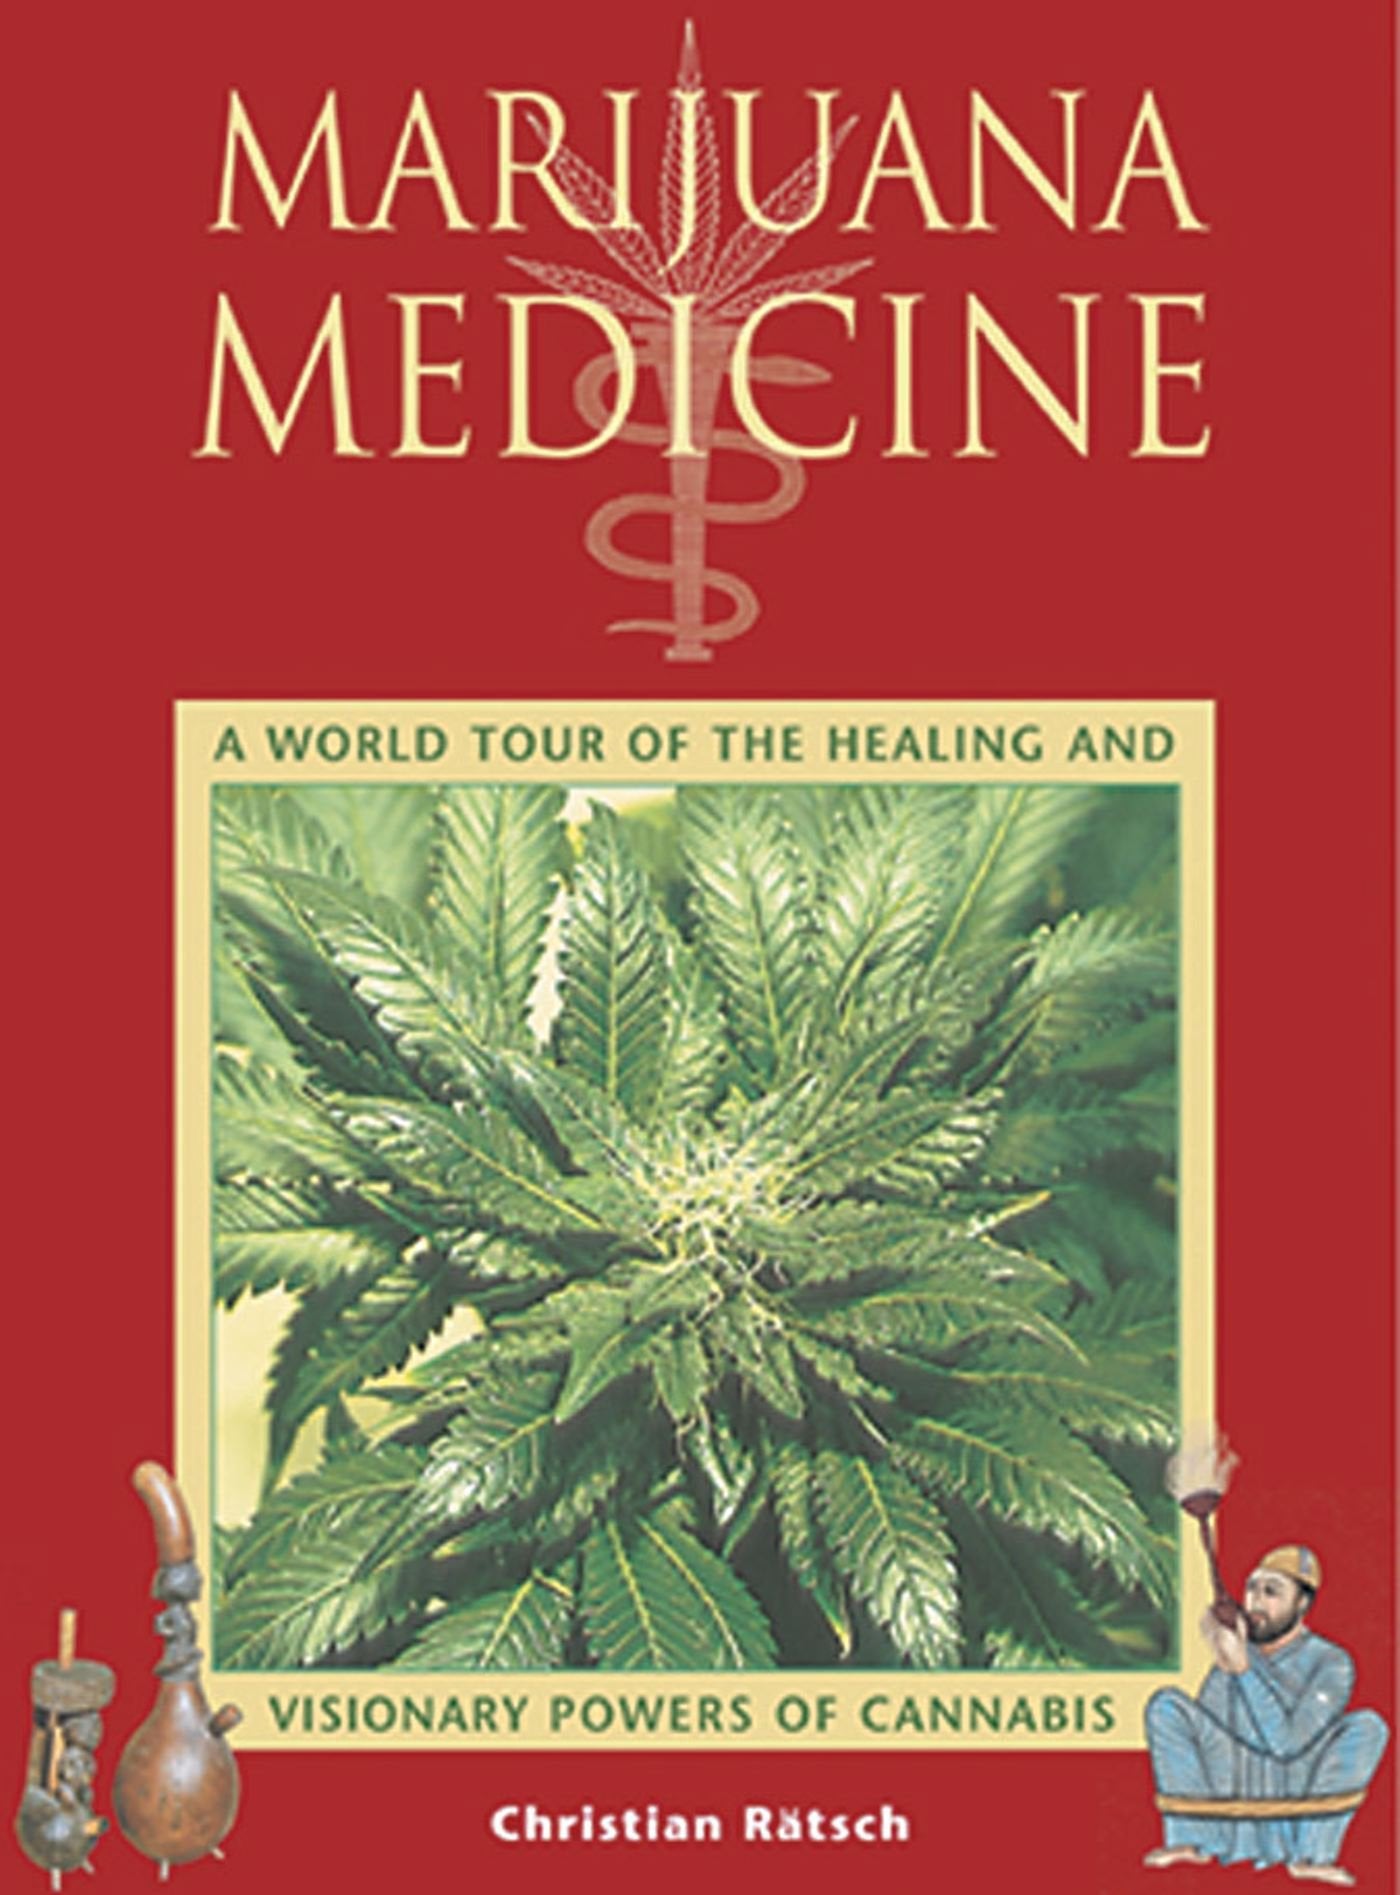 Marijuana Medicine A World Tour of the Healing and Visionary Powers of Cannabis By Christian Rätsch